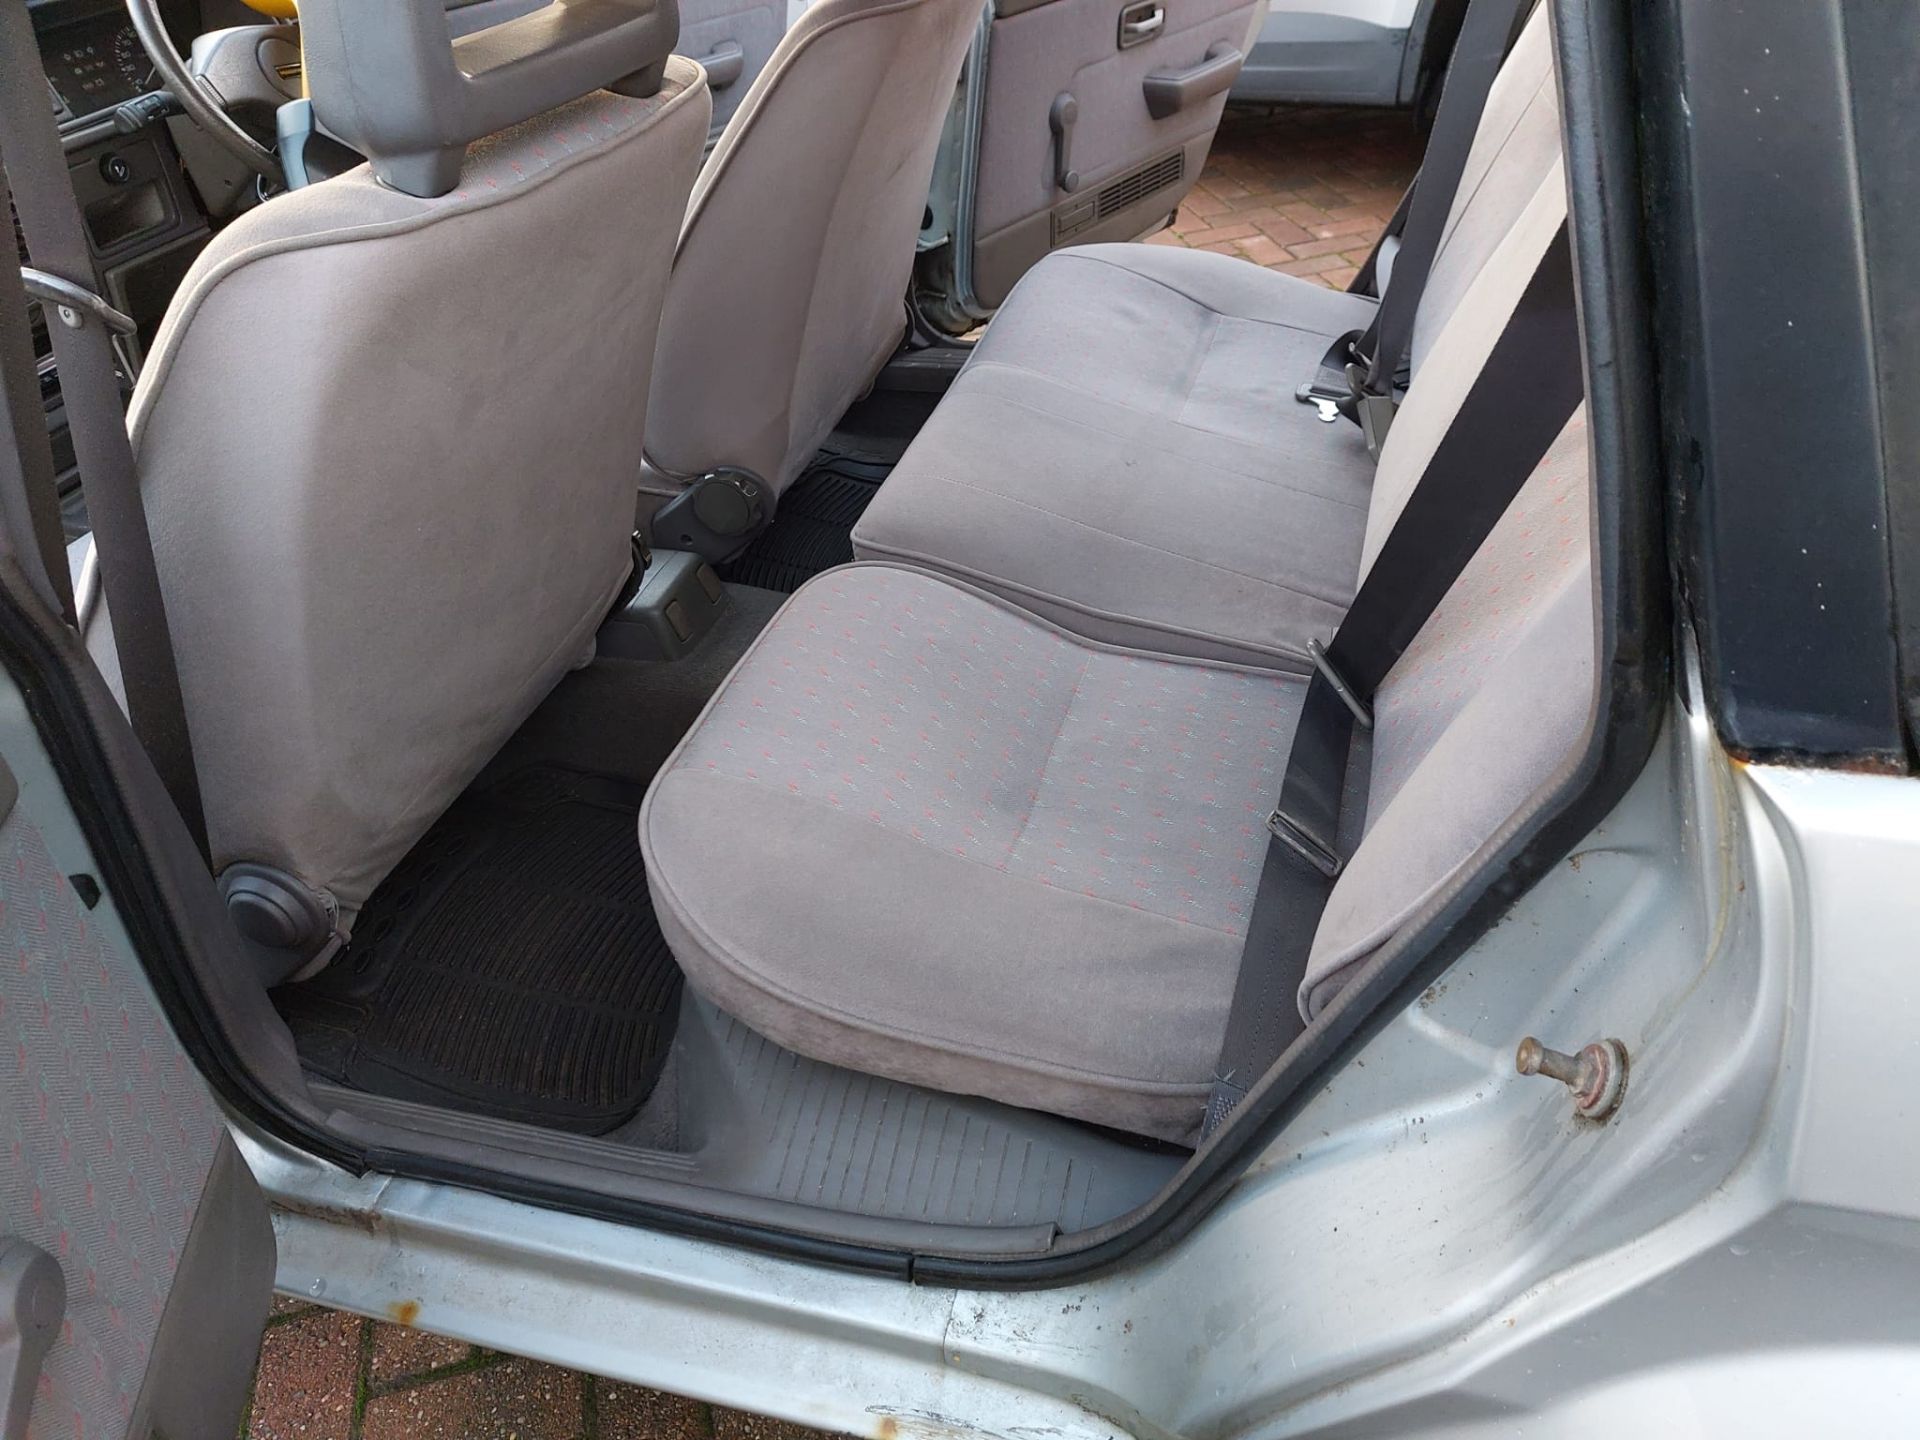 CLASSIC ROVER MAESTRO CLUBMAN D1993 WITH A 2.0L DIESEL TURBO ENGINE - 58K MILES (NO VAT ON HAMMER) - Image 3 of 12